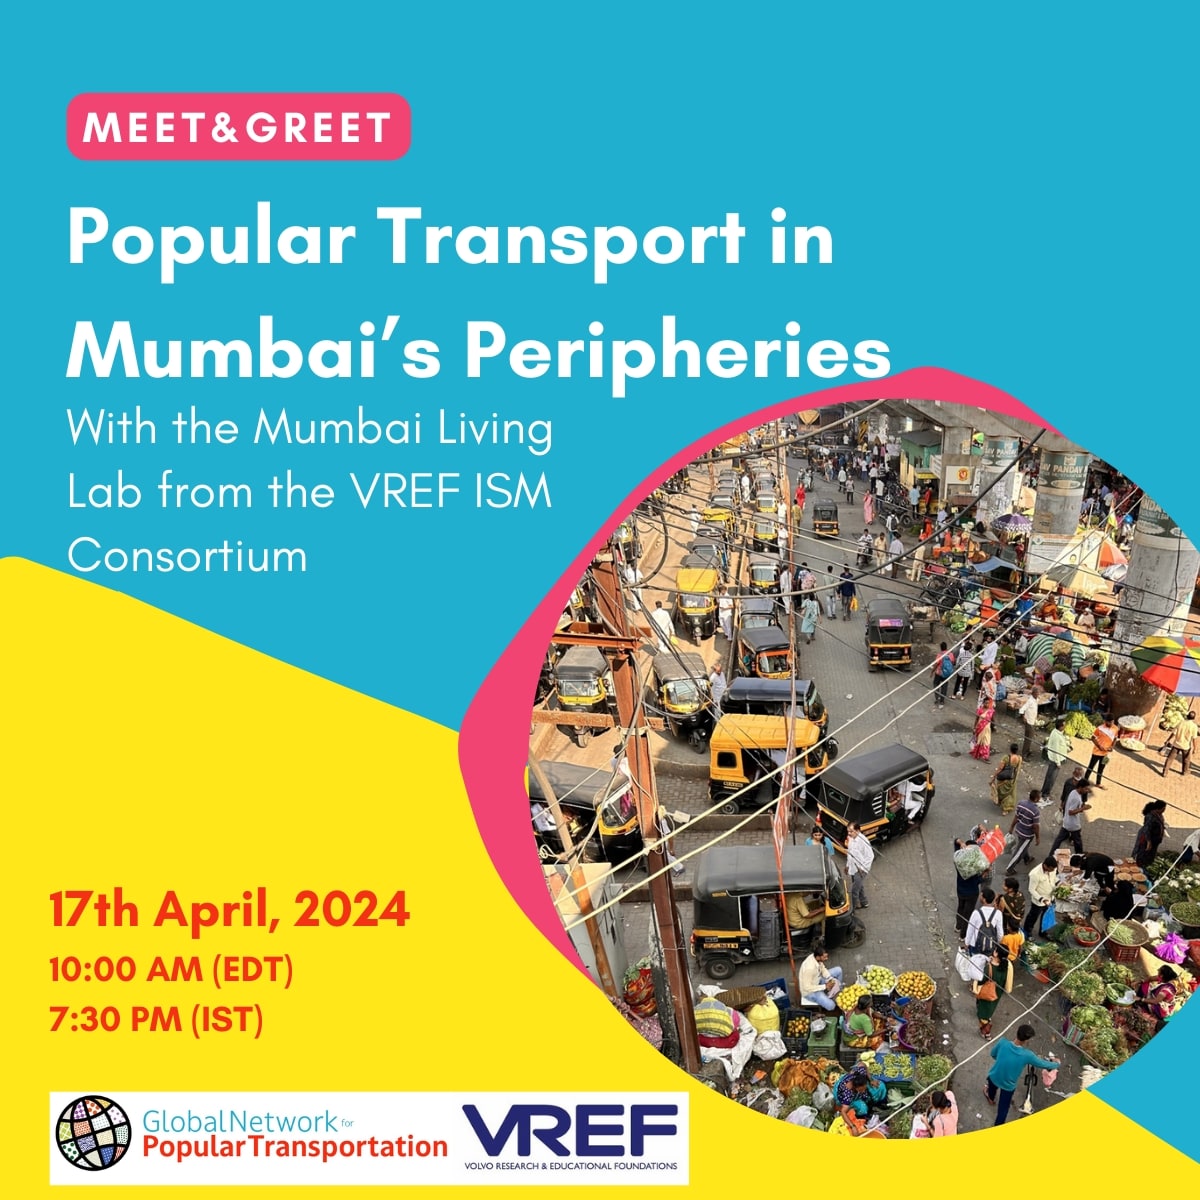 Reminder that our first Meet and Greet this year will take place tomorrow! We will be talking to @SPARCIndia2 about their work with popular transport in Mumbai You can register here: shorturl.at/jXZ59